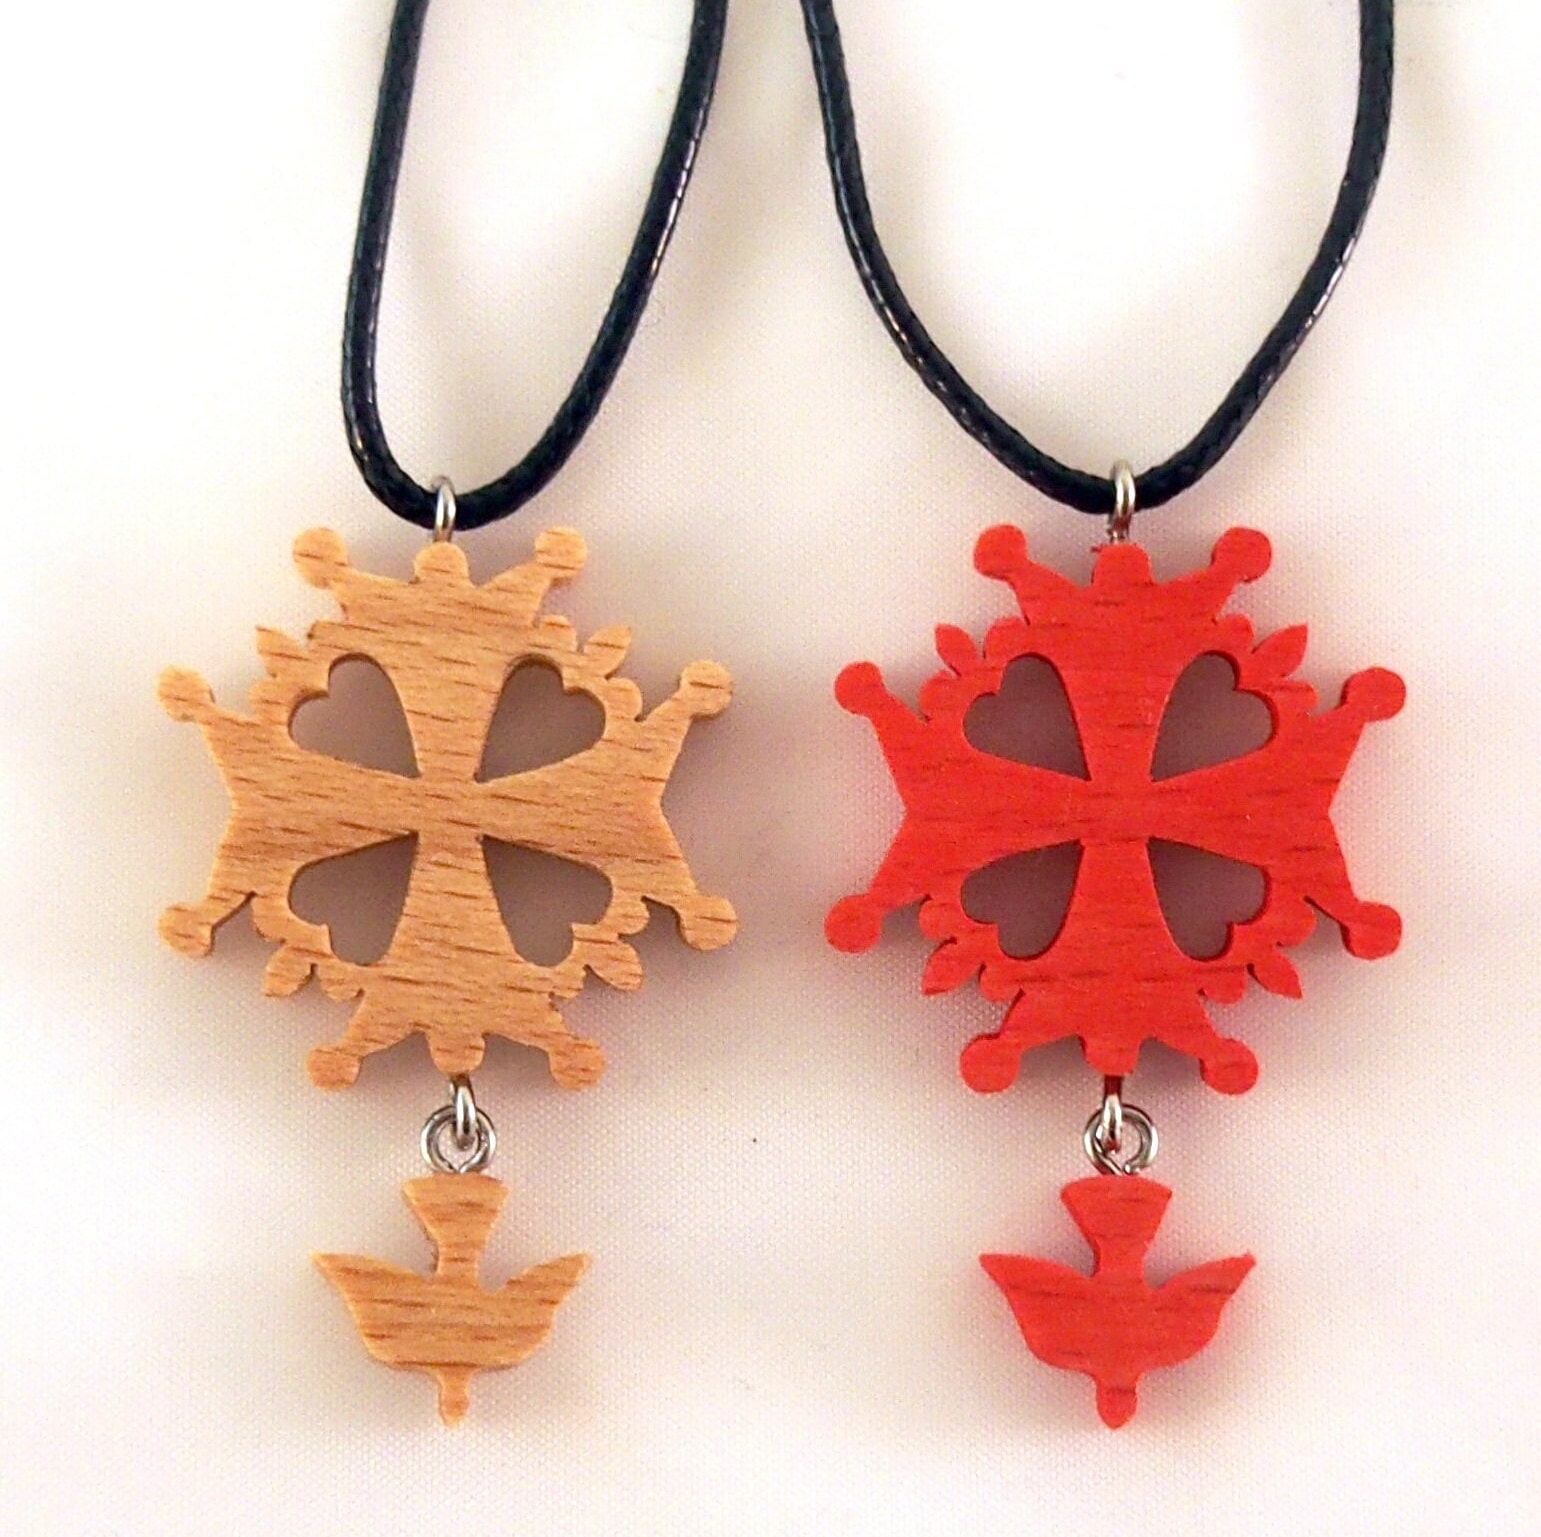 Catholic Laser Cut Wood Crucifix Cross Pendant Cord Necklace for Kids 24 In  | eBay